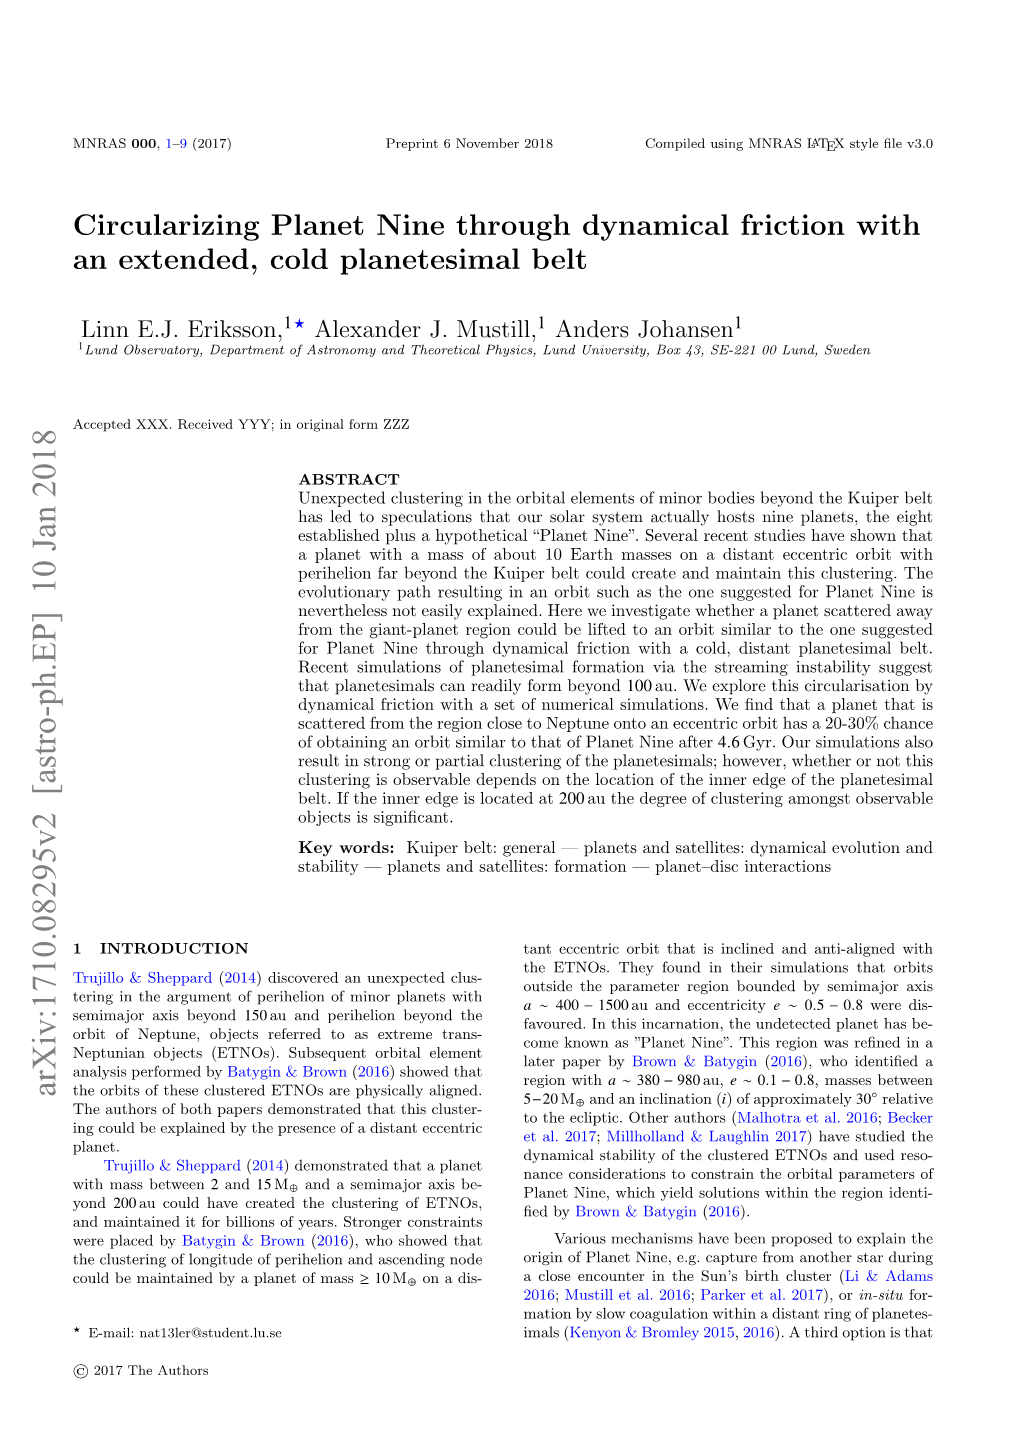 Circularizing Planet Nine Through Dynamical Friction with an Extended, Cold Planetesimal Belt